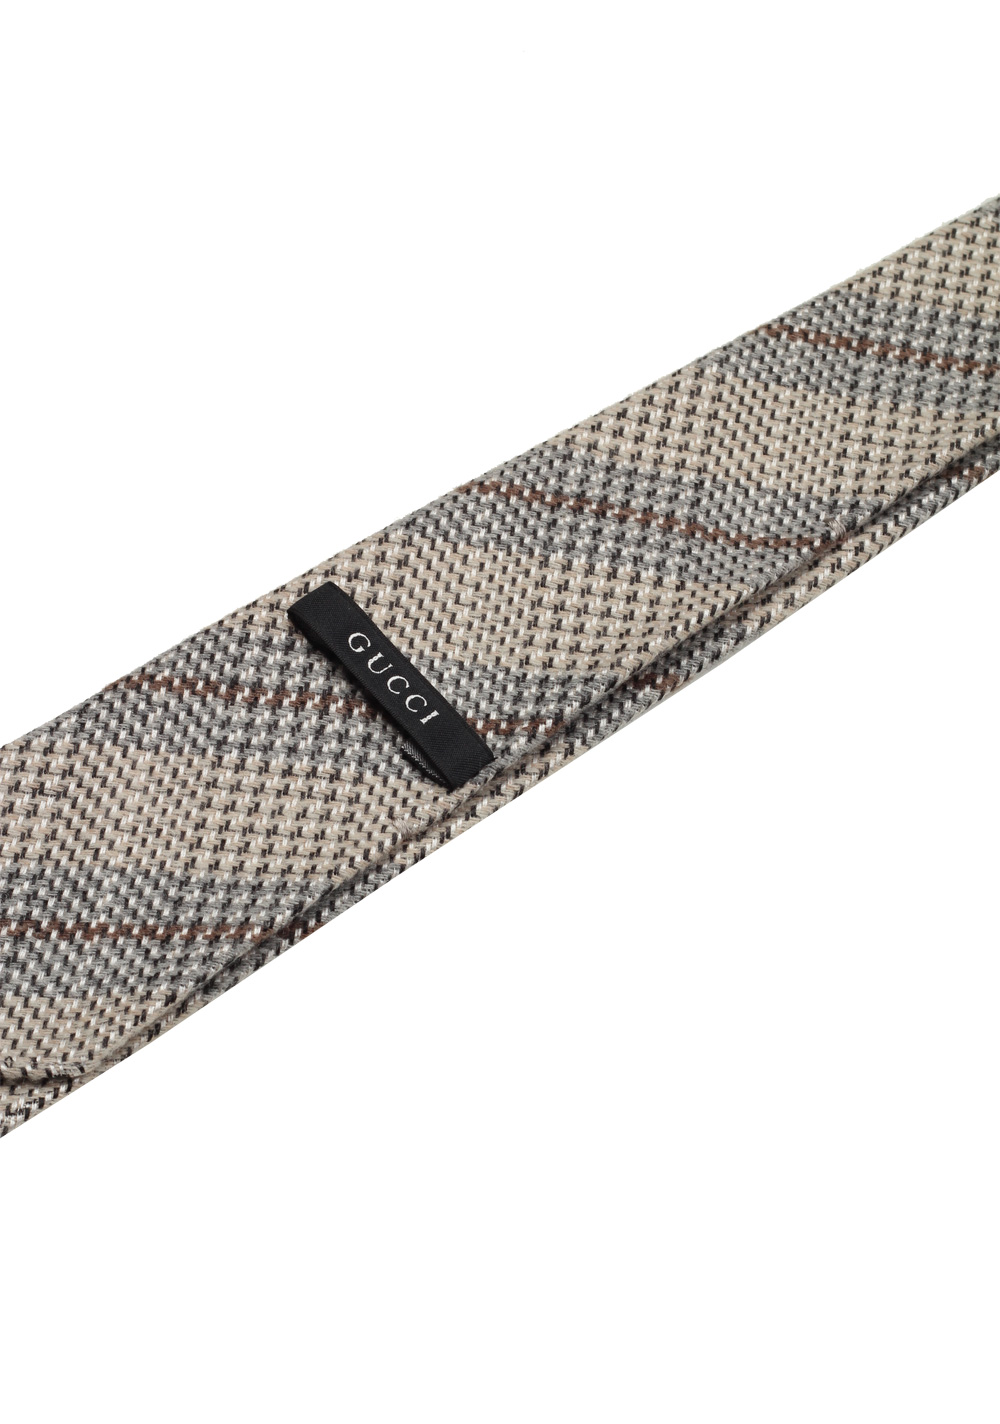 Gucci Gray Patterned Checked Tie | Costume Limité